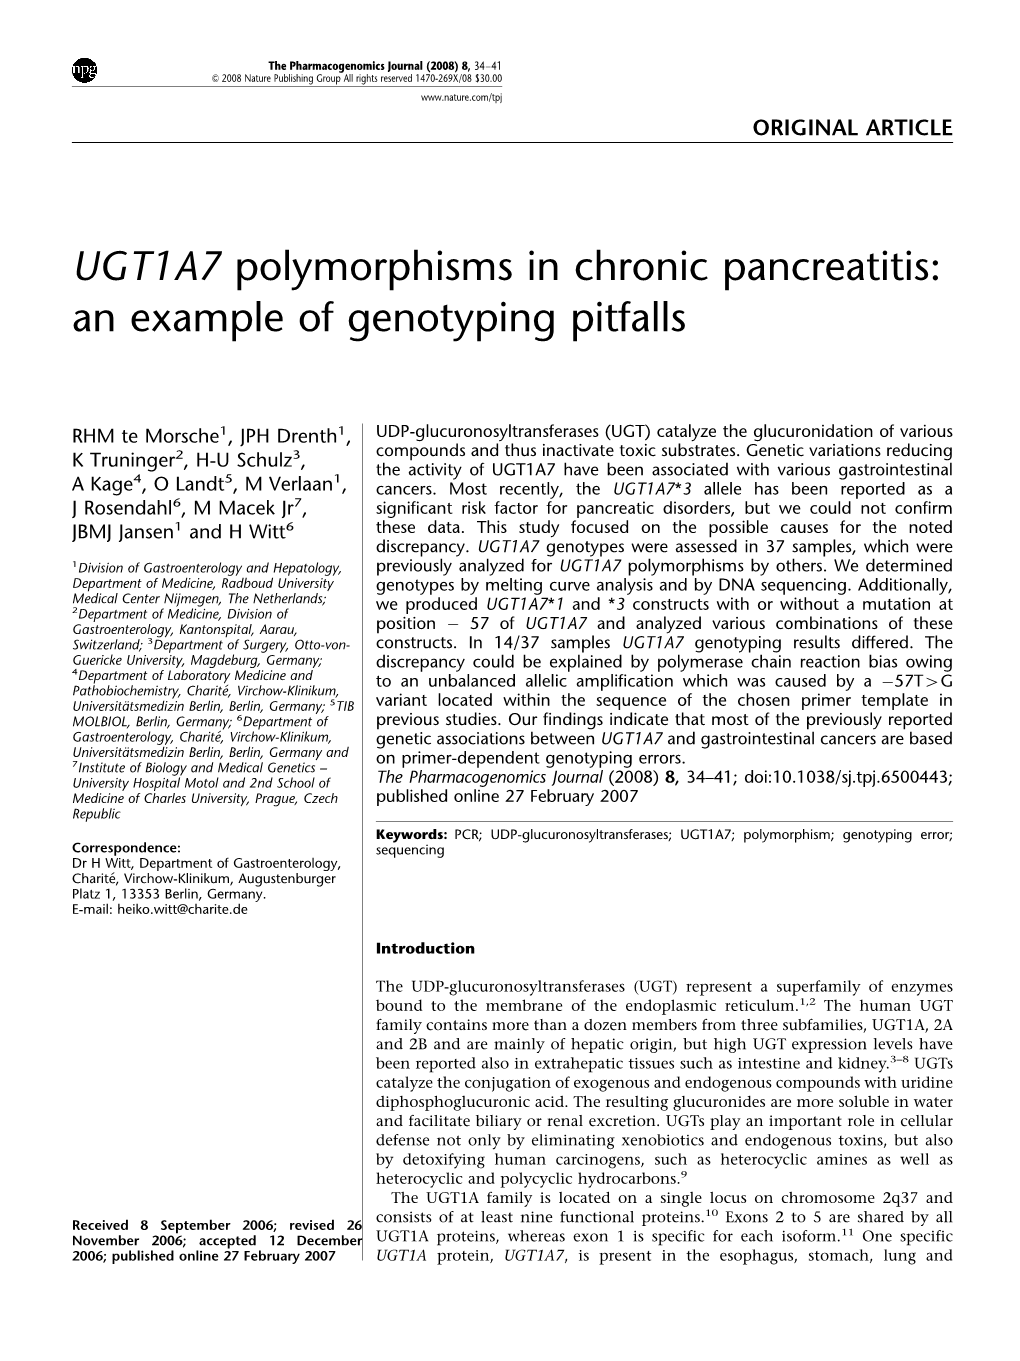 UGT1A7 Polymorphisms in Chronic Pancreatitis: an Example of Genotyping Pitfalls